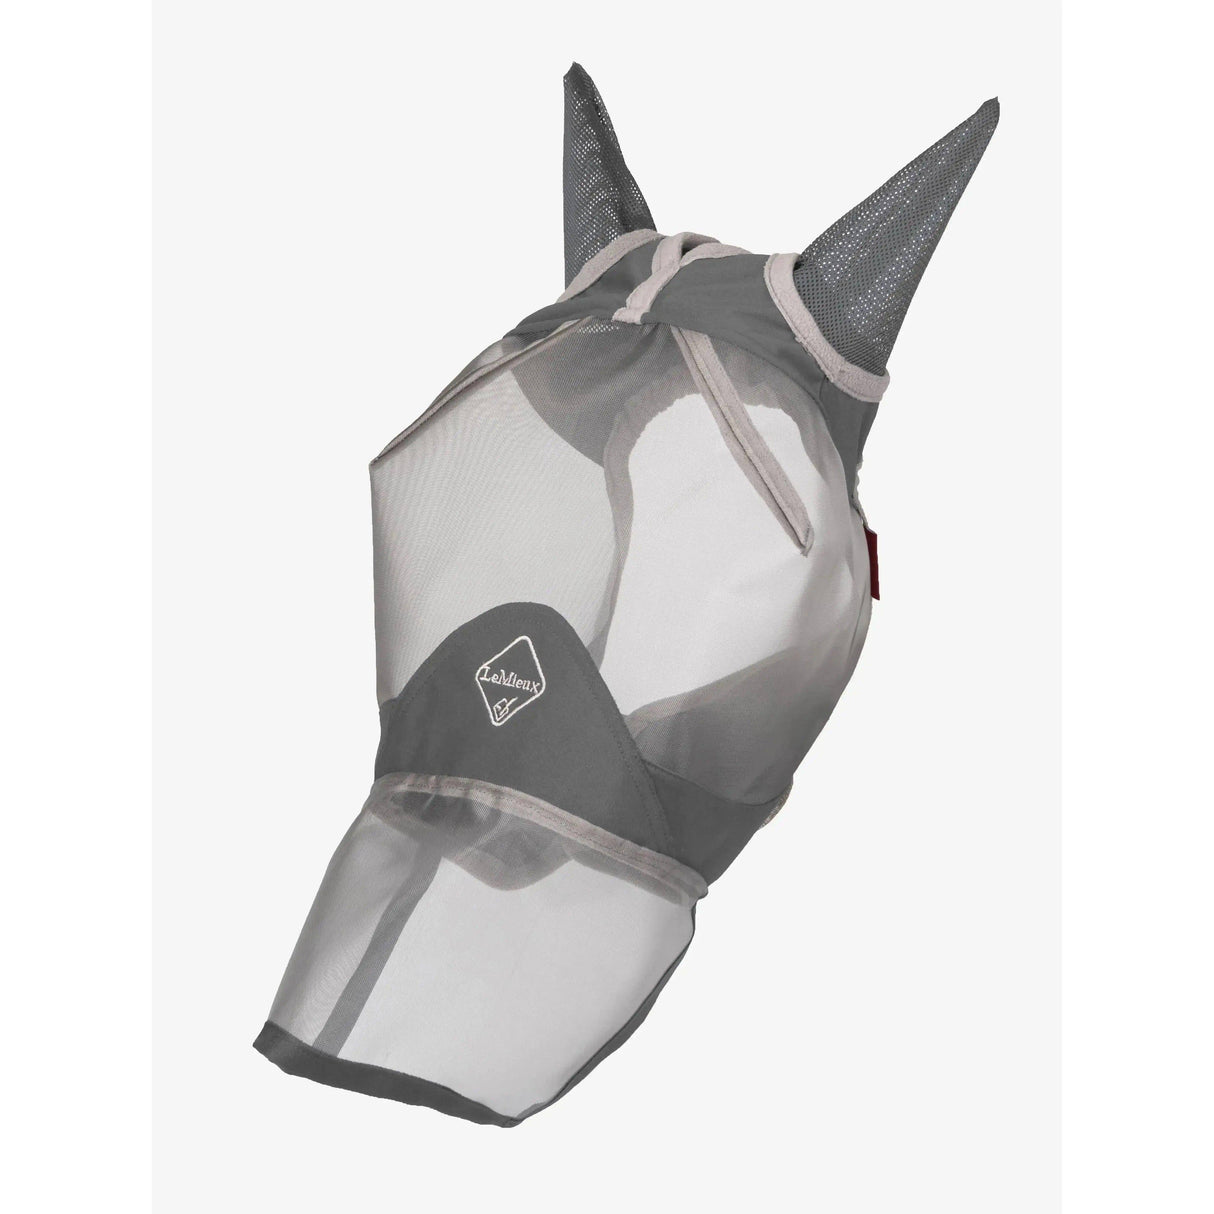 LeMieux ArmourShield Pro Full Fly Mask X Small Navy LeMieux Fly Mask Barnstaple Equestrian Supplies